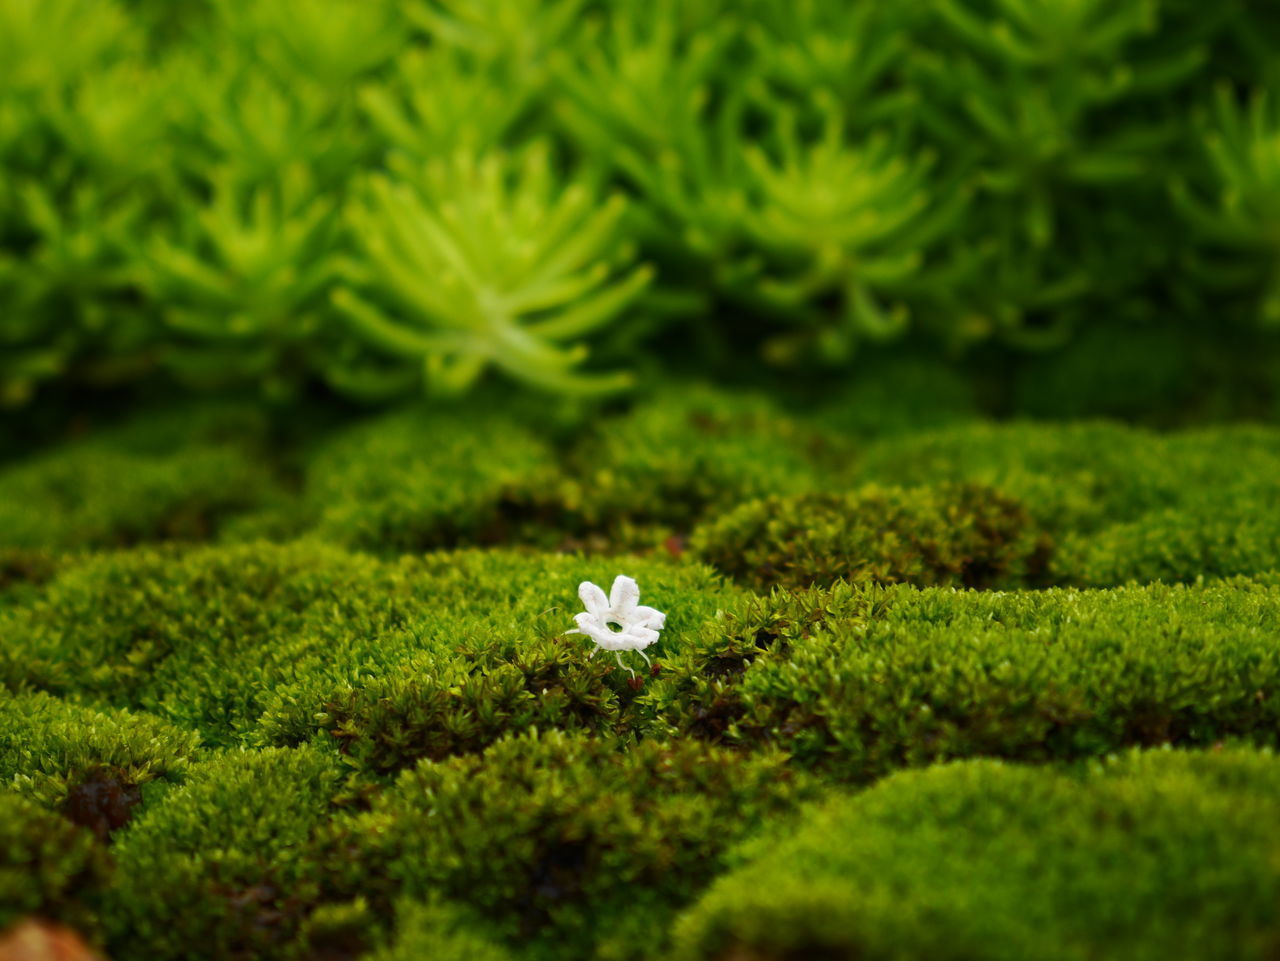 HIGH ANGLE VIEW OF SMALL WHITE FLOWER ON FIELD